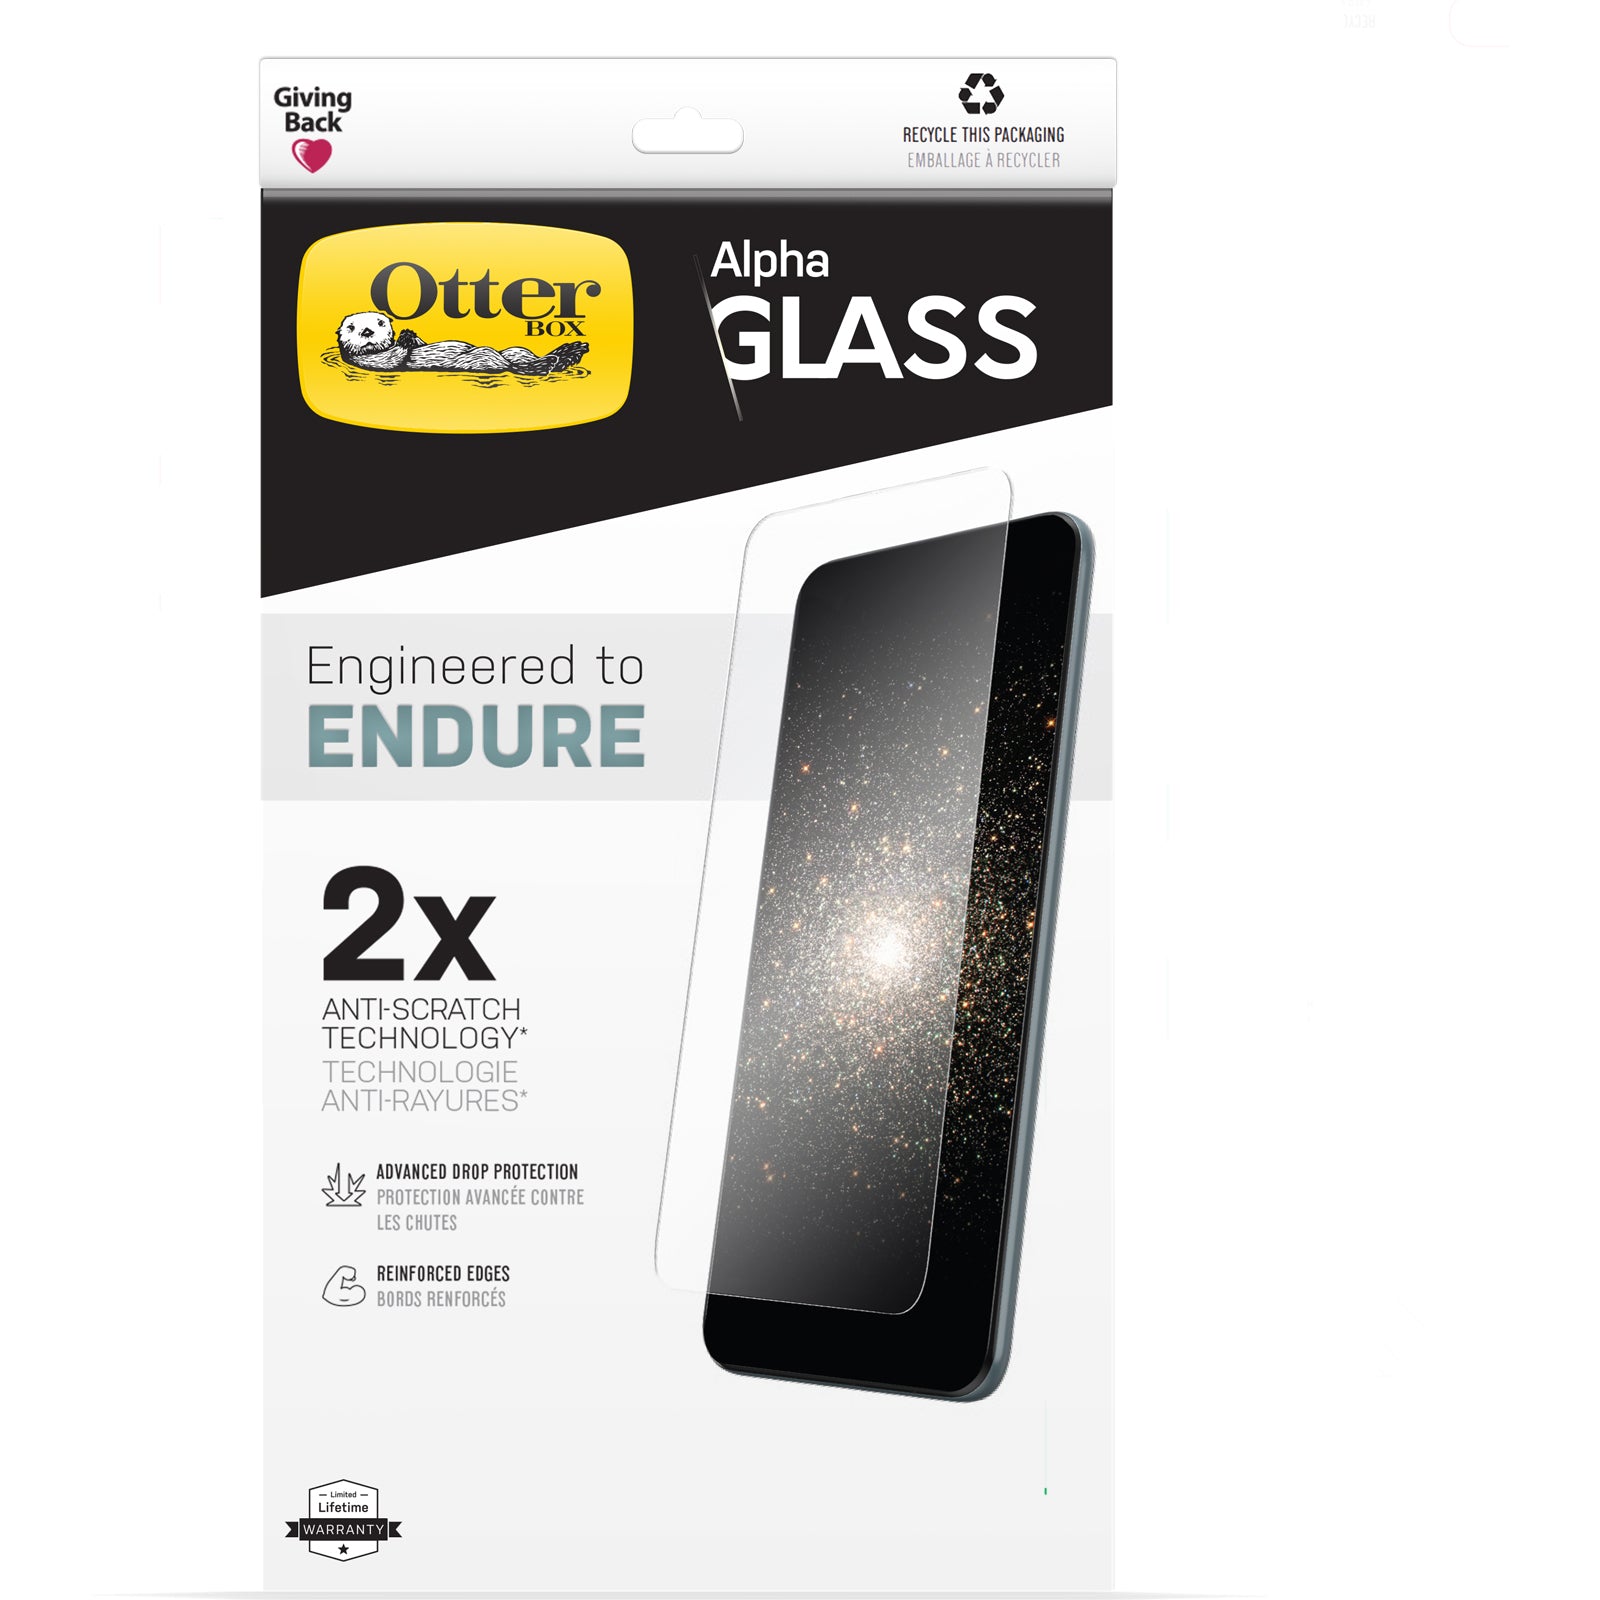 OtterBox Alpha Glass Screen Protector for iPhone 13 mini, Tempered Glass, x2 Scratch Protection, Antimicrobial Protection